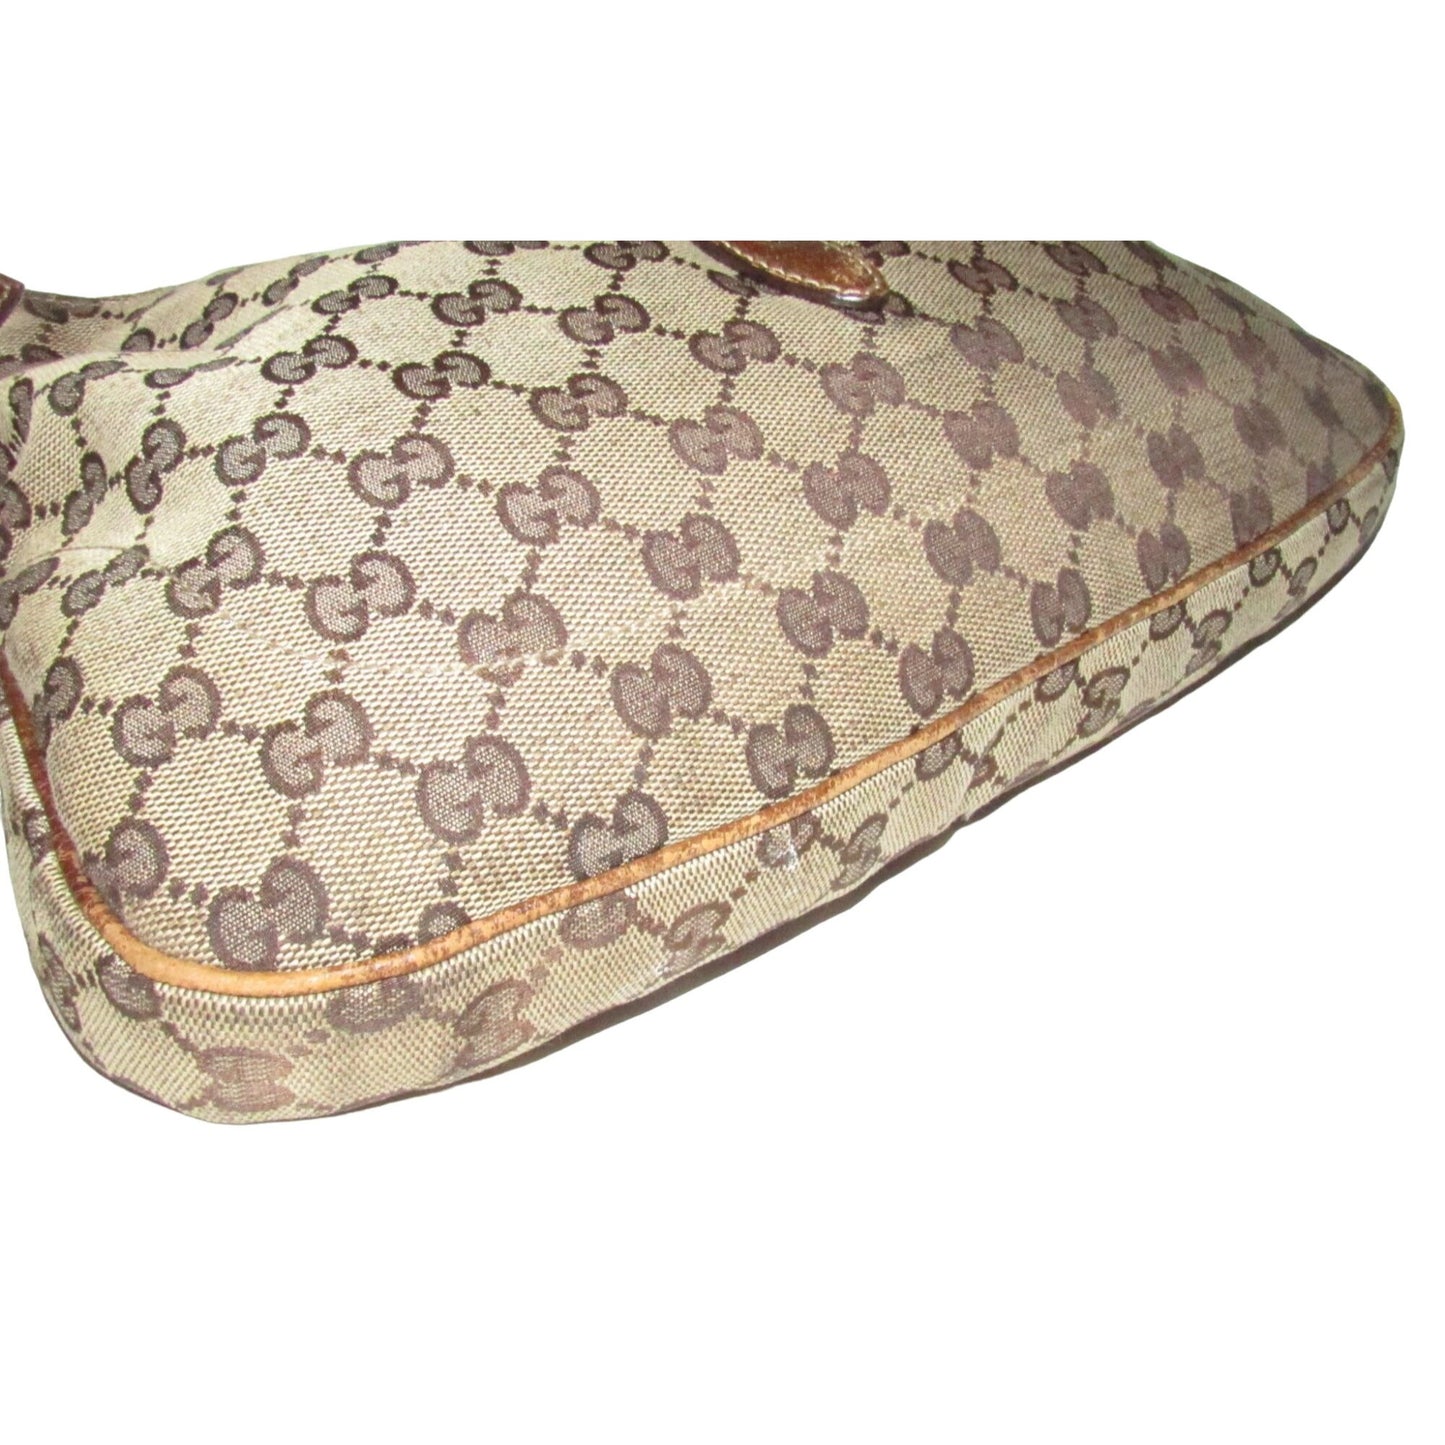 Gucci brown Guccissima print XL Jackie hobo with a gold piston clasp!